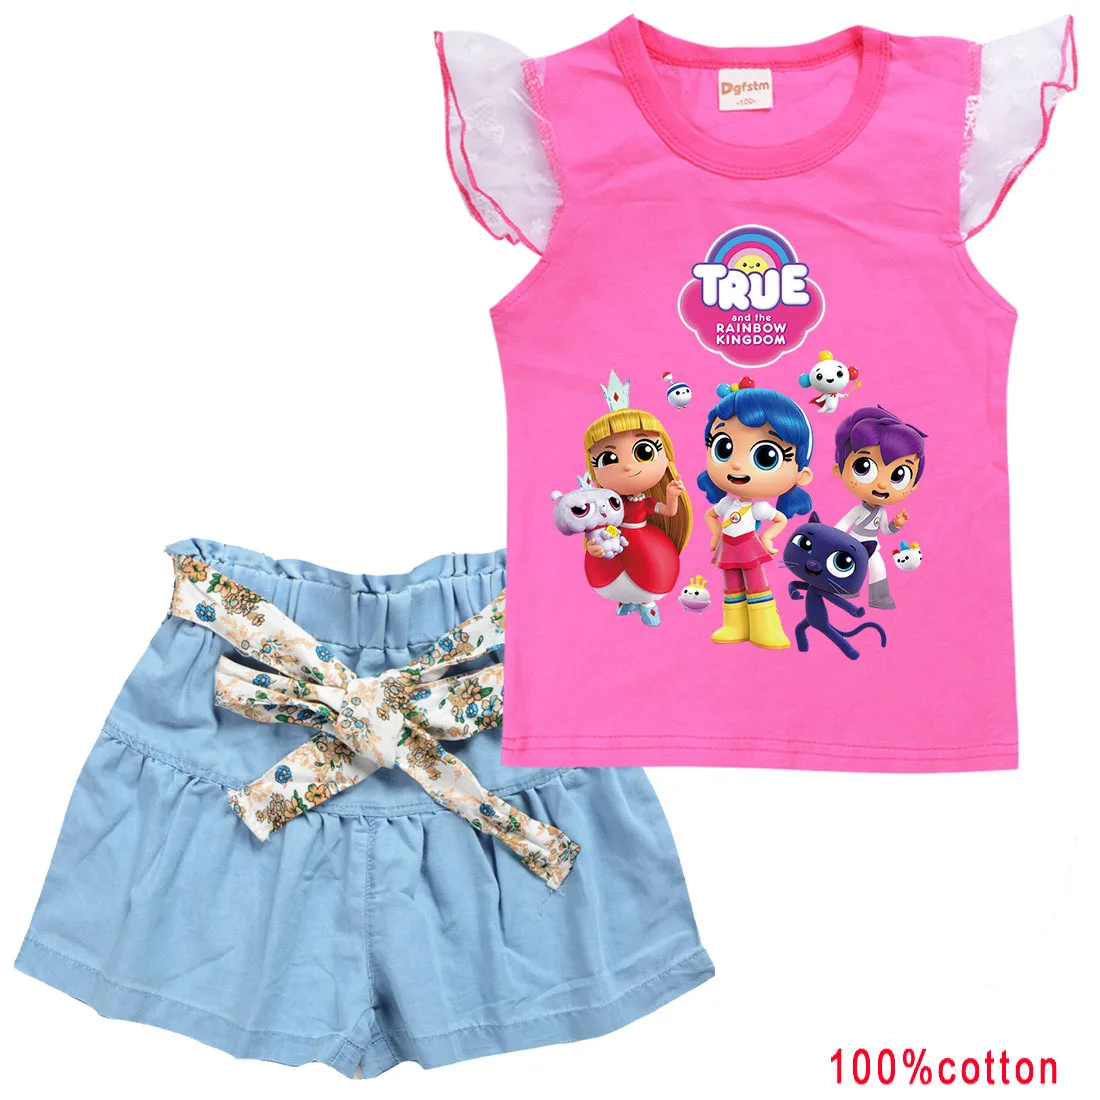 

True and The Rainbow Kingdom UK Clothes Set 2021 Summer Baby Girl Short Sleeve T-shirt+Denim A-line Shorts 2pcs Sets Boys Outfit